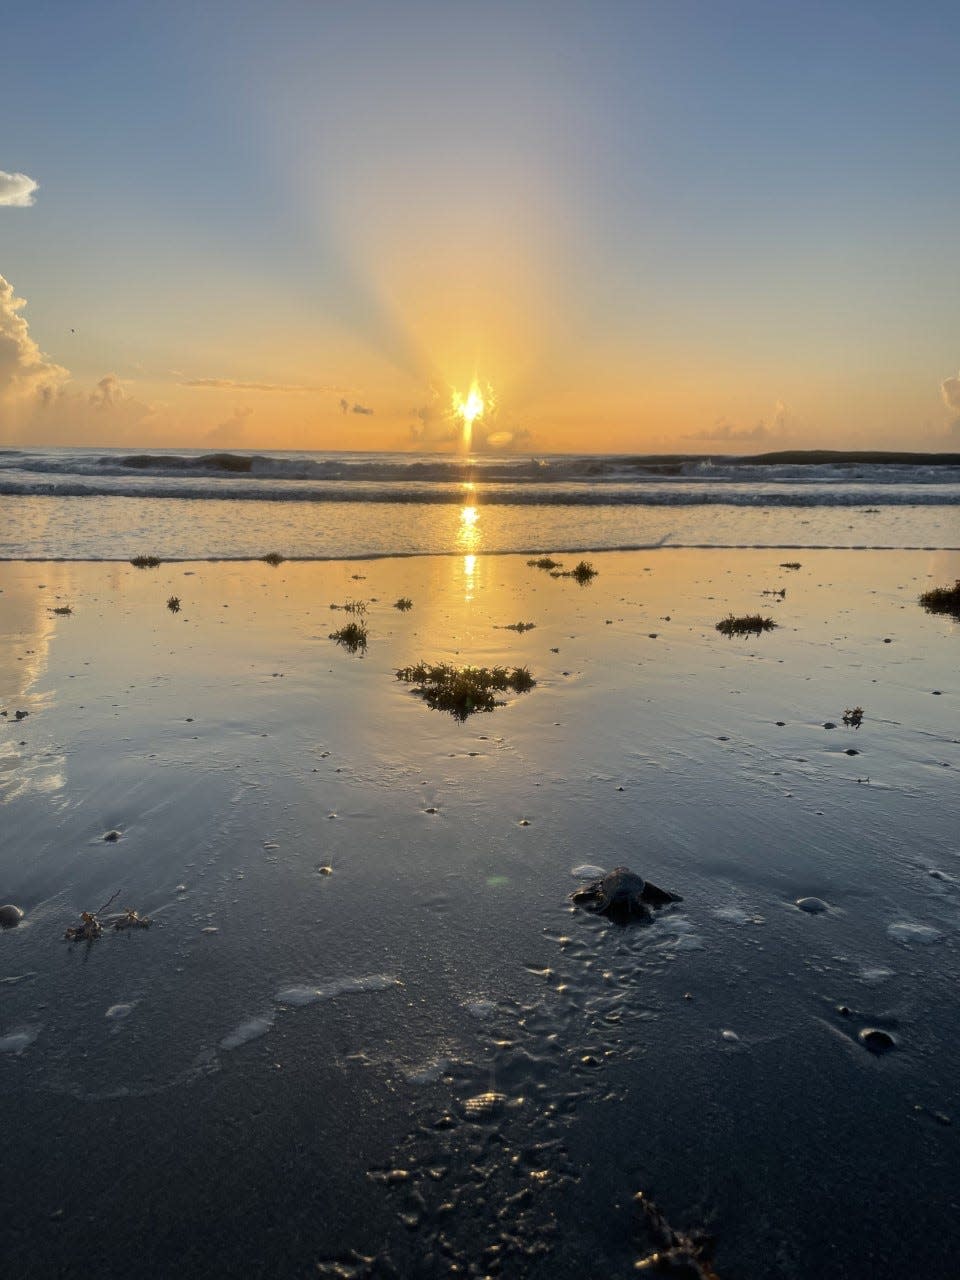 A sea turtle hatchling crawls toward the Atlantic Ocean at sunrise at Archie Carr National Wildlife Refuge. Photo taken under permits number 186 and 171, held by the University of Central Florida's Marine Turtle Research Group